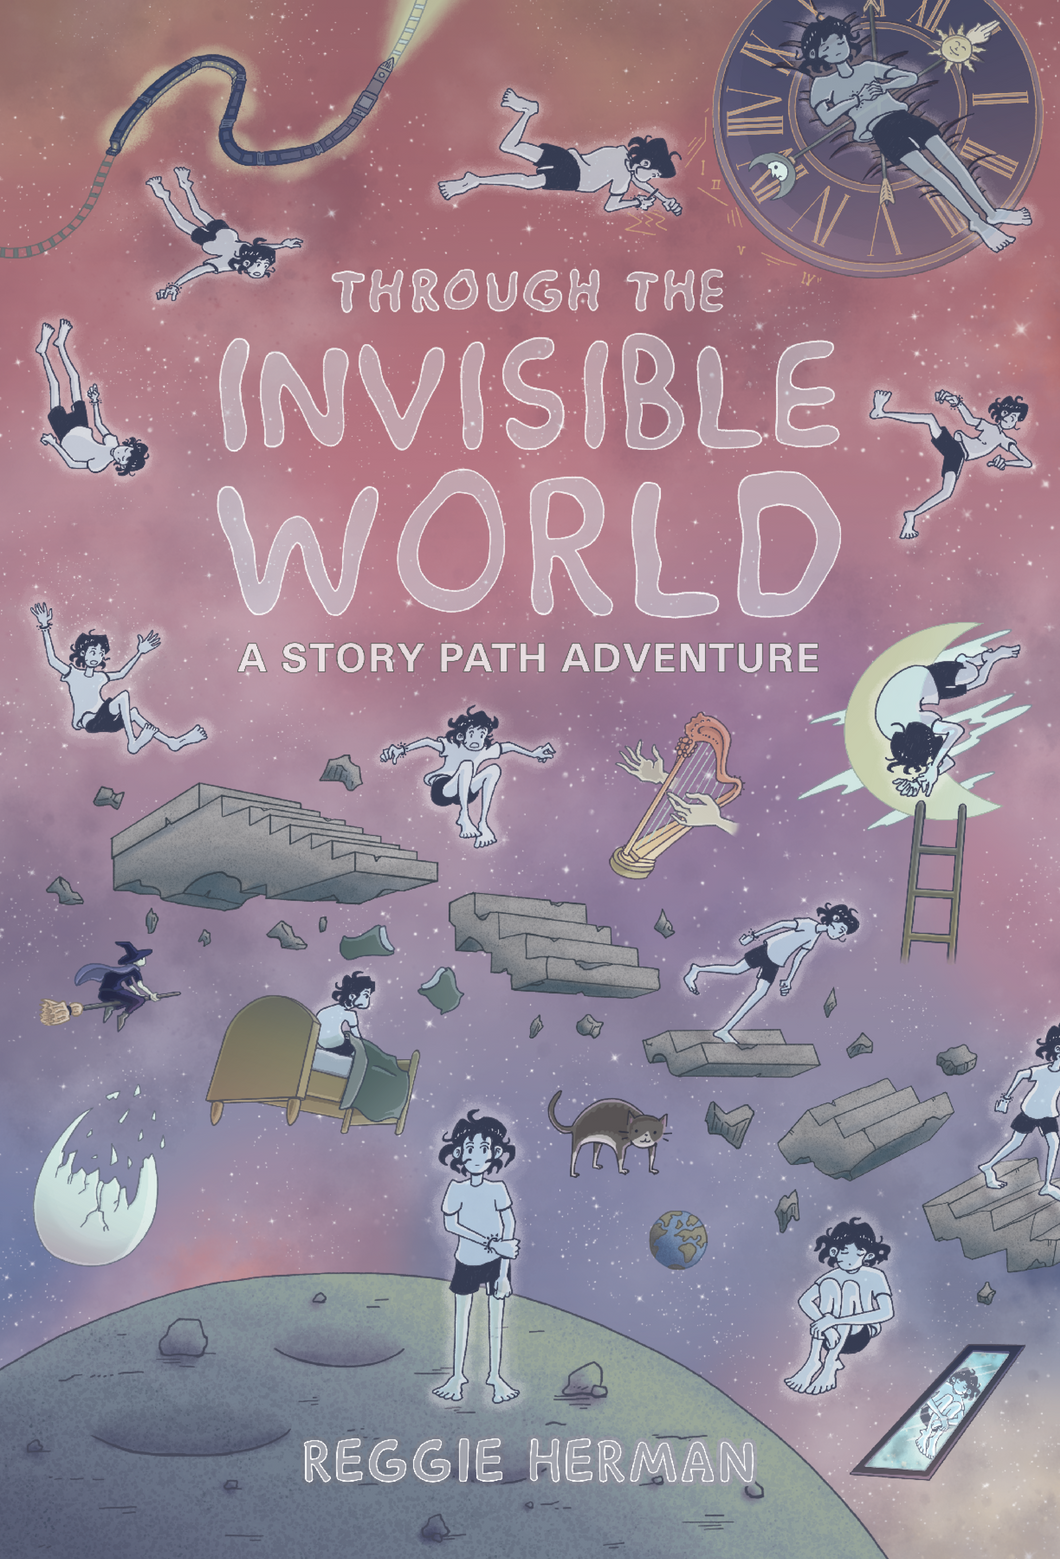 Through the Invisible World: A Story Path Adventure